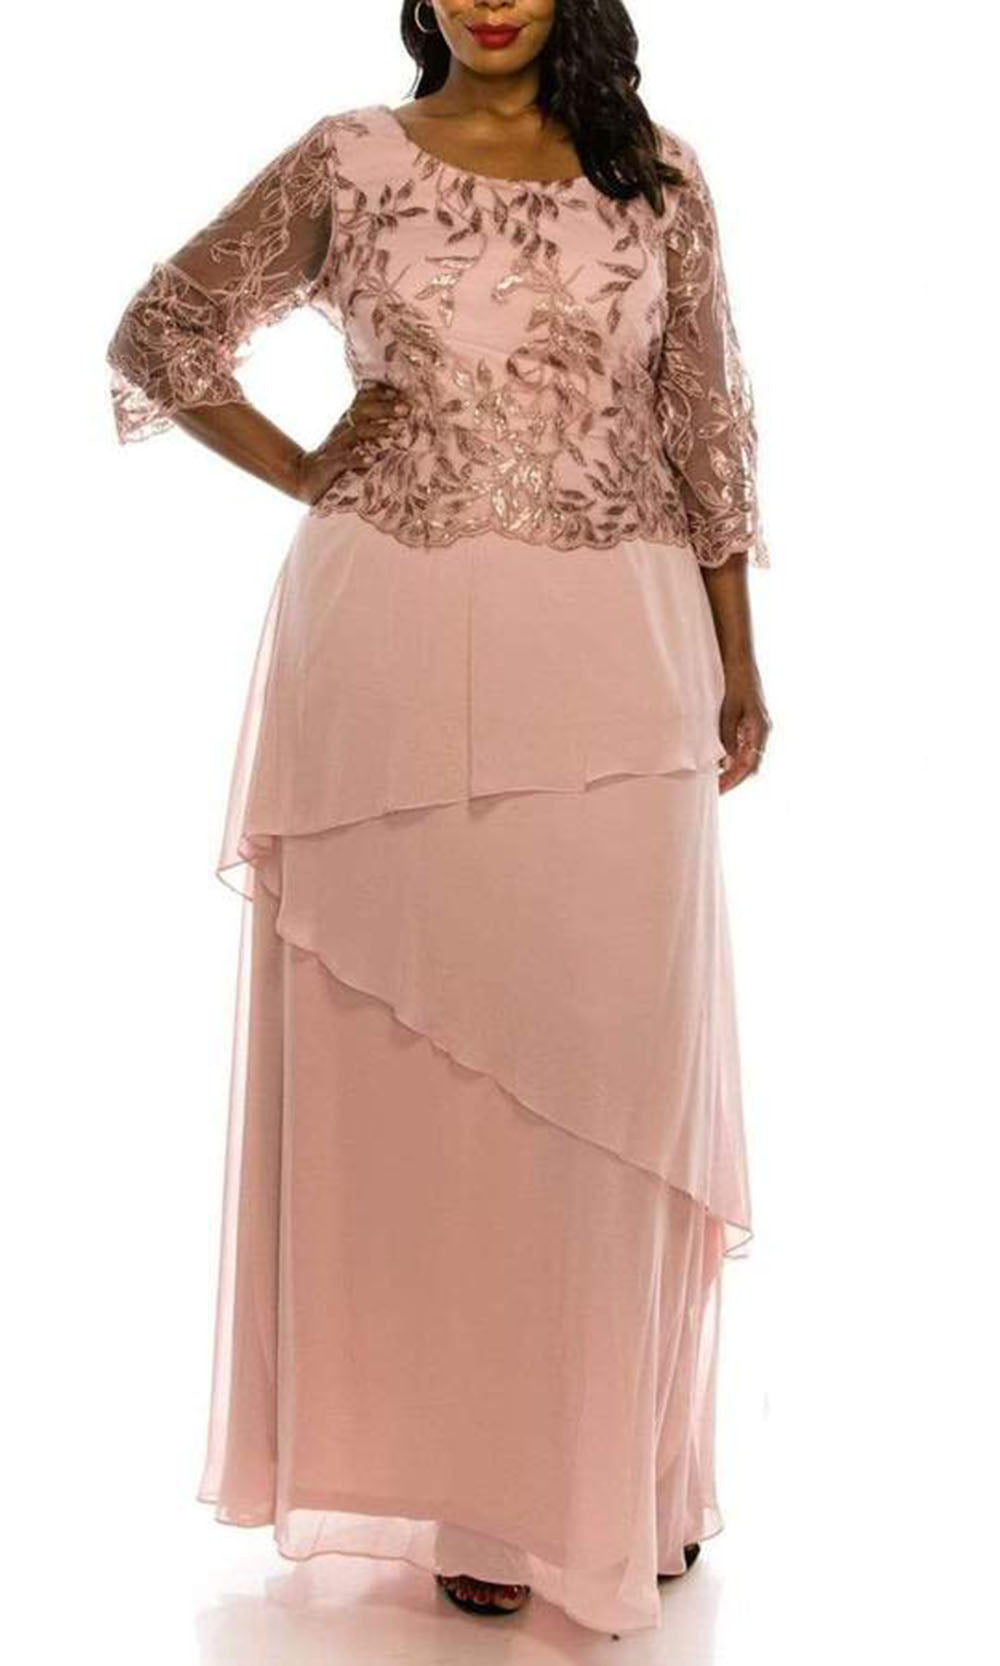 Le Bos - Plus Size Sequined Chiffon Dress 27722 - 1 pc Rose In Size 20W Available CCSALE 20W / Rose